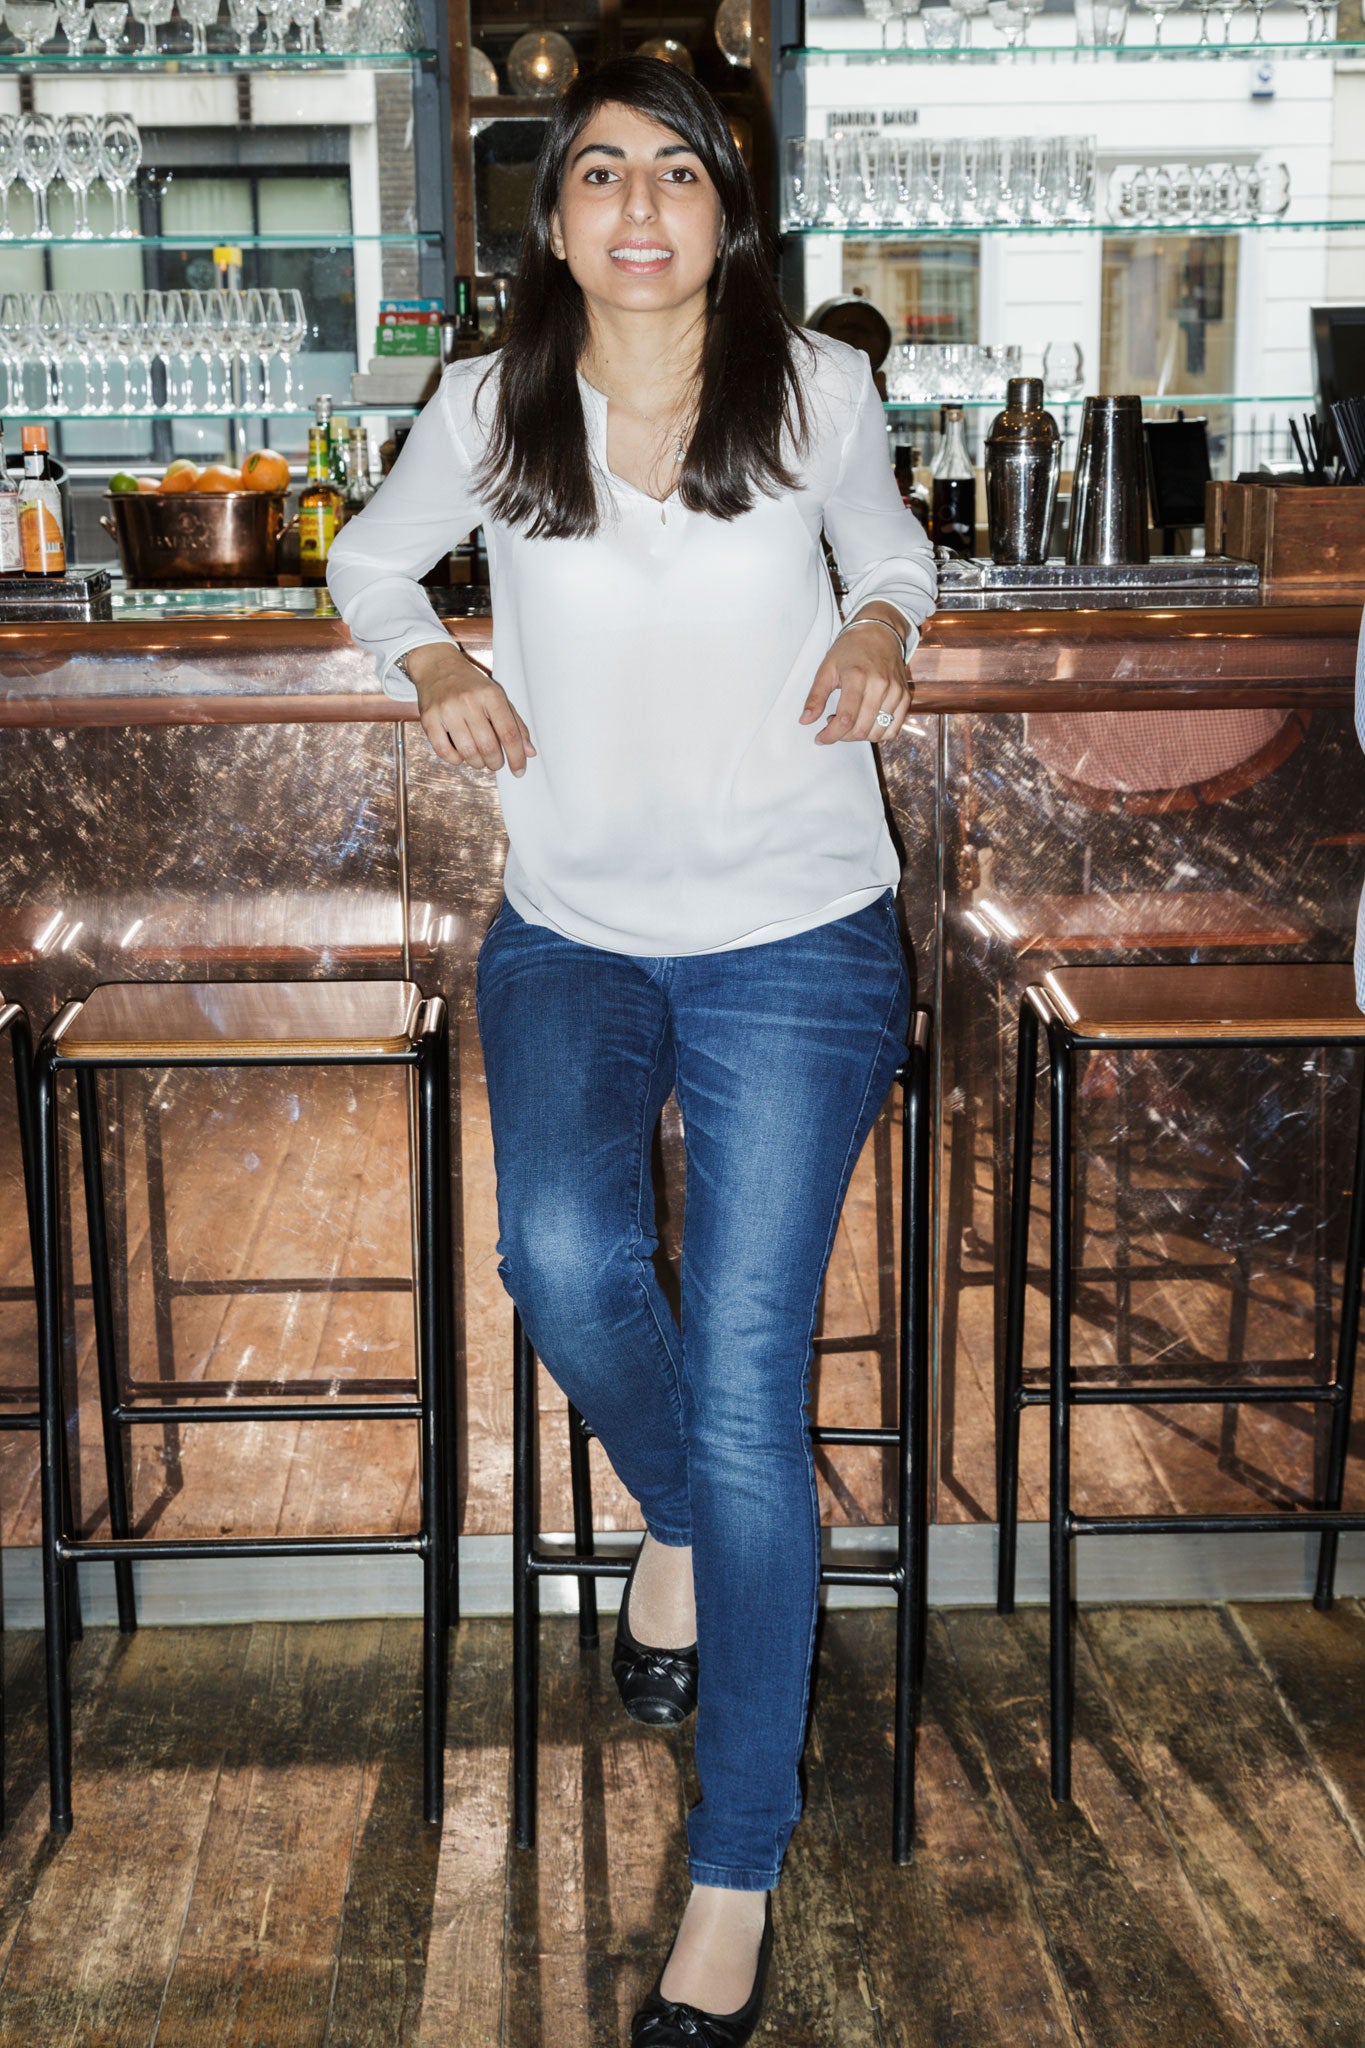 Sunaina Sethi: 'For a long time, wine was linked to class. But now we know wine is for everyone'